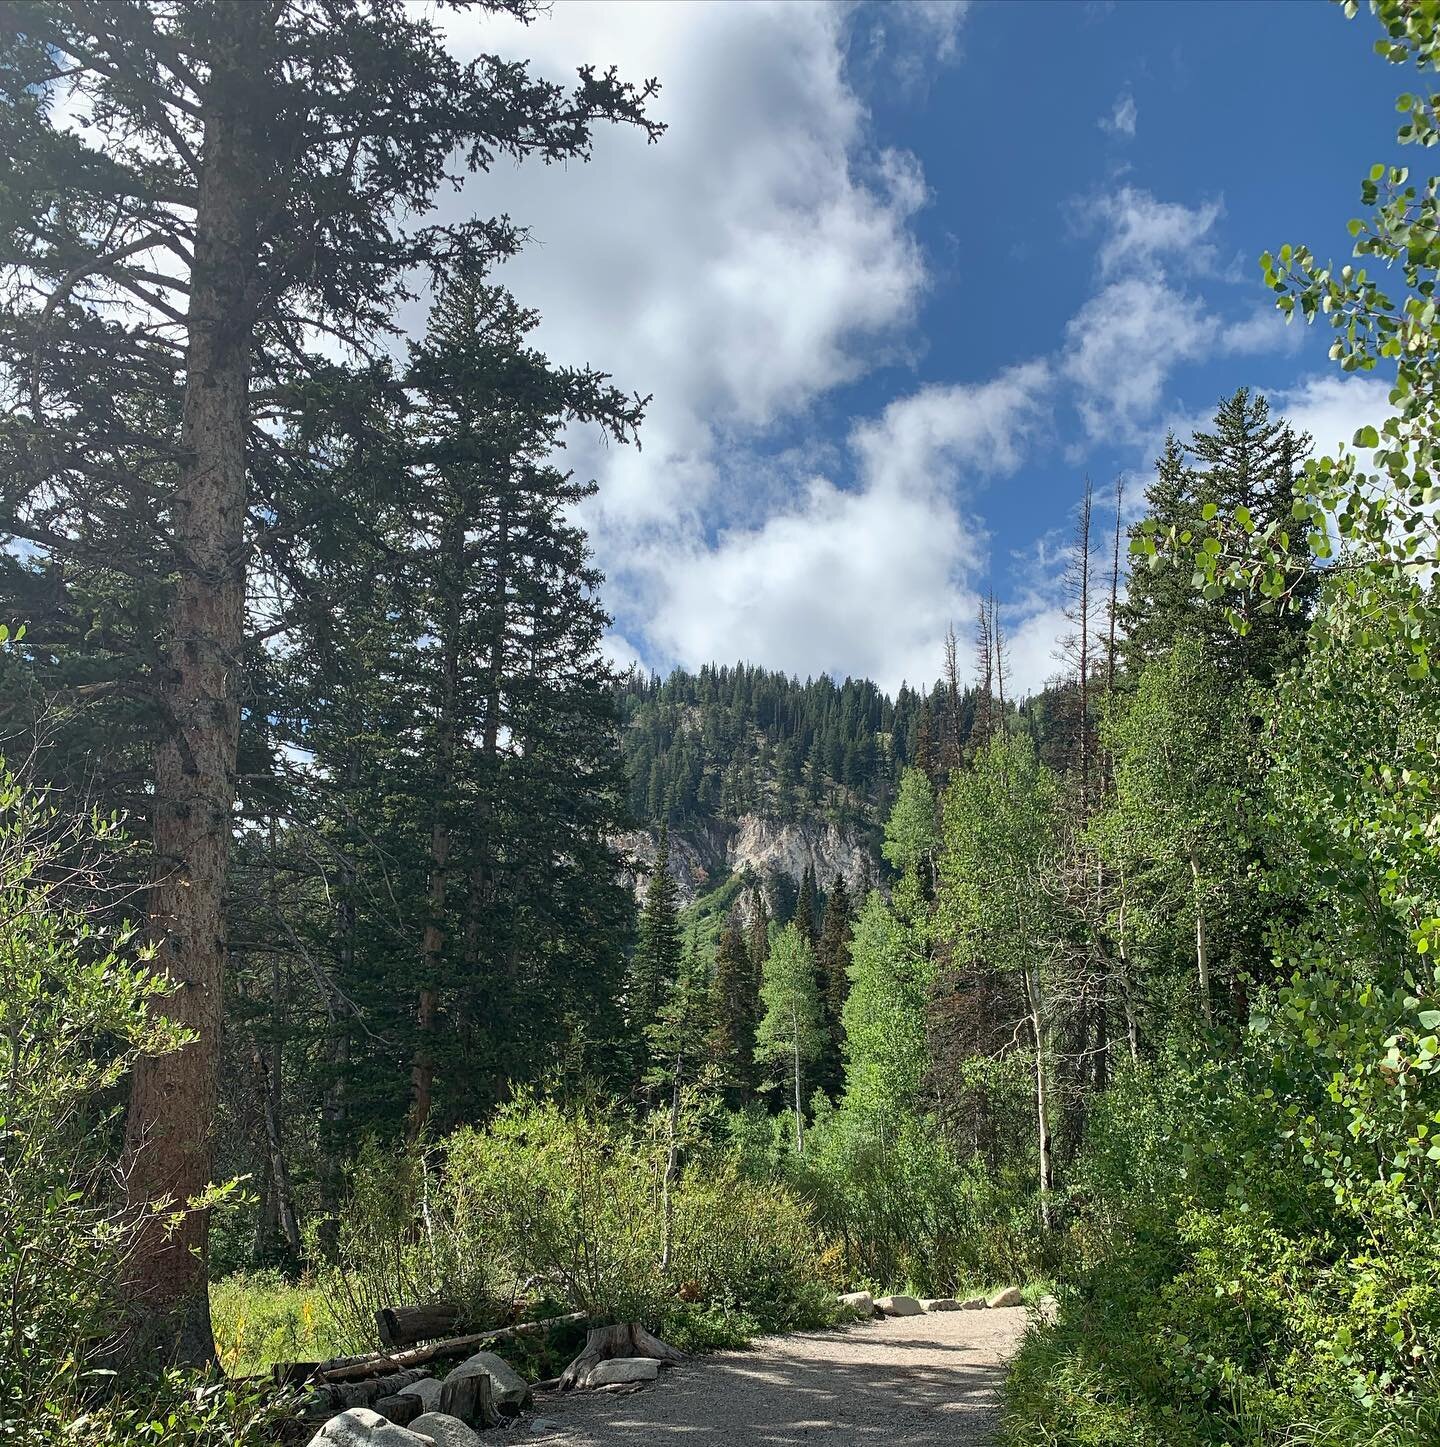 This Sunday, June 12th we will be at Pioneer Hall for our 11 AM Service &bull;
Our Night Service will be held up at Big Cottonwood Canyon, &ldquo;Dogwood&rdquo; Picnic Area. Follow directions to this Address then go up about 1-2 miles and Dogwood is 